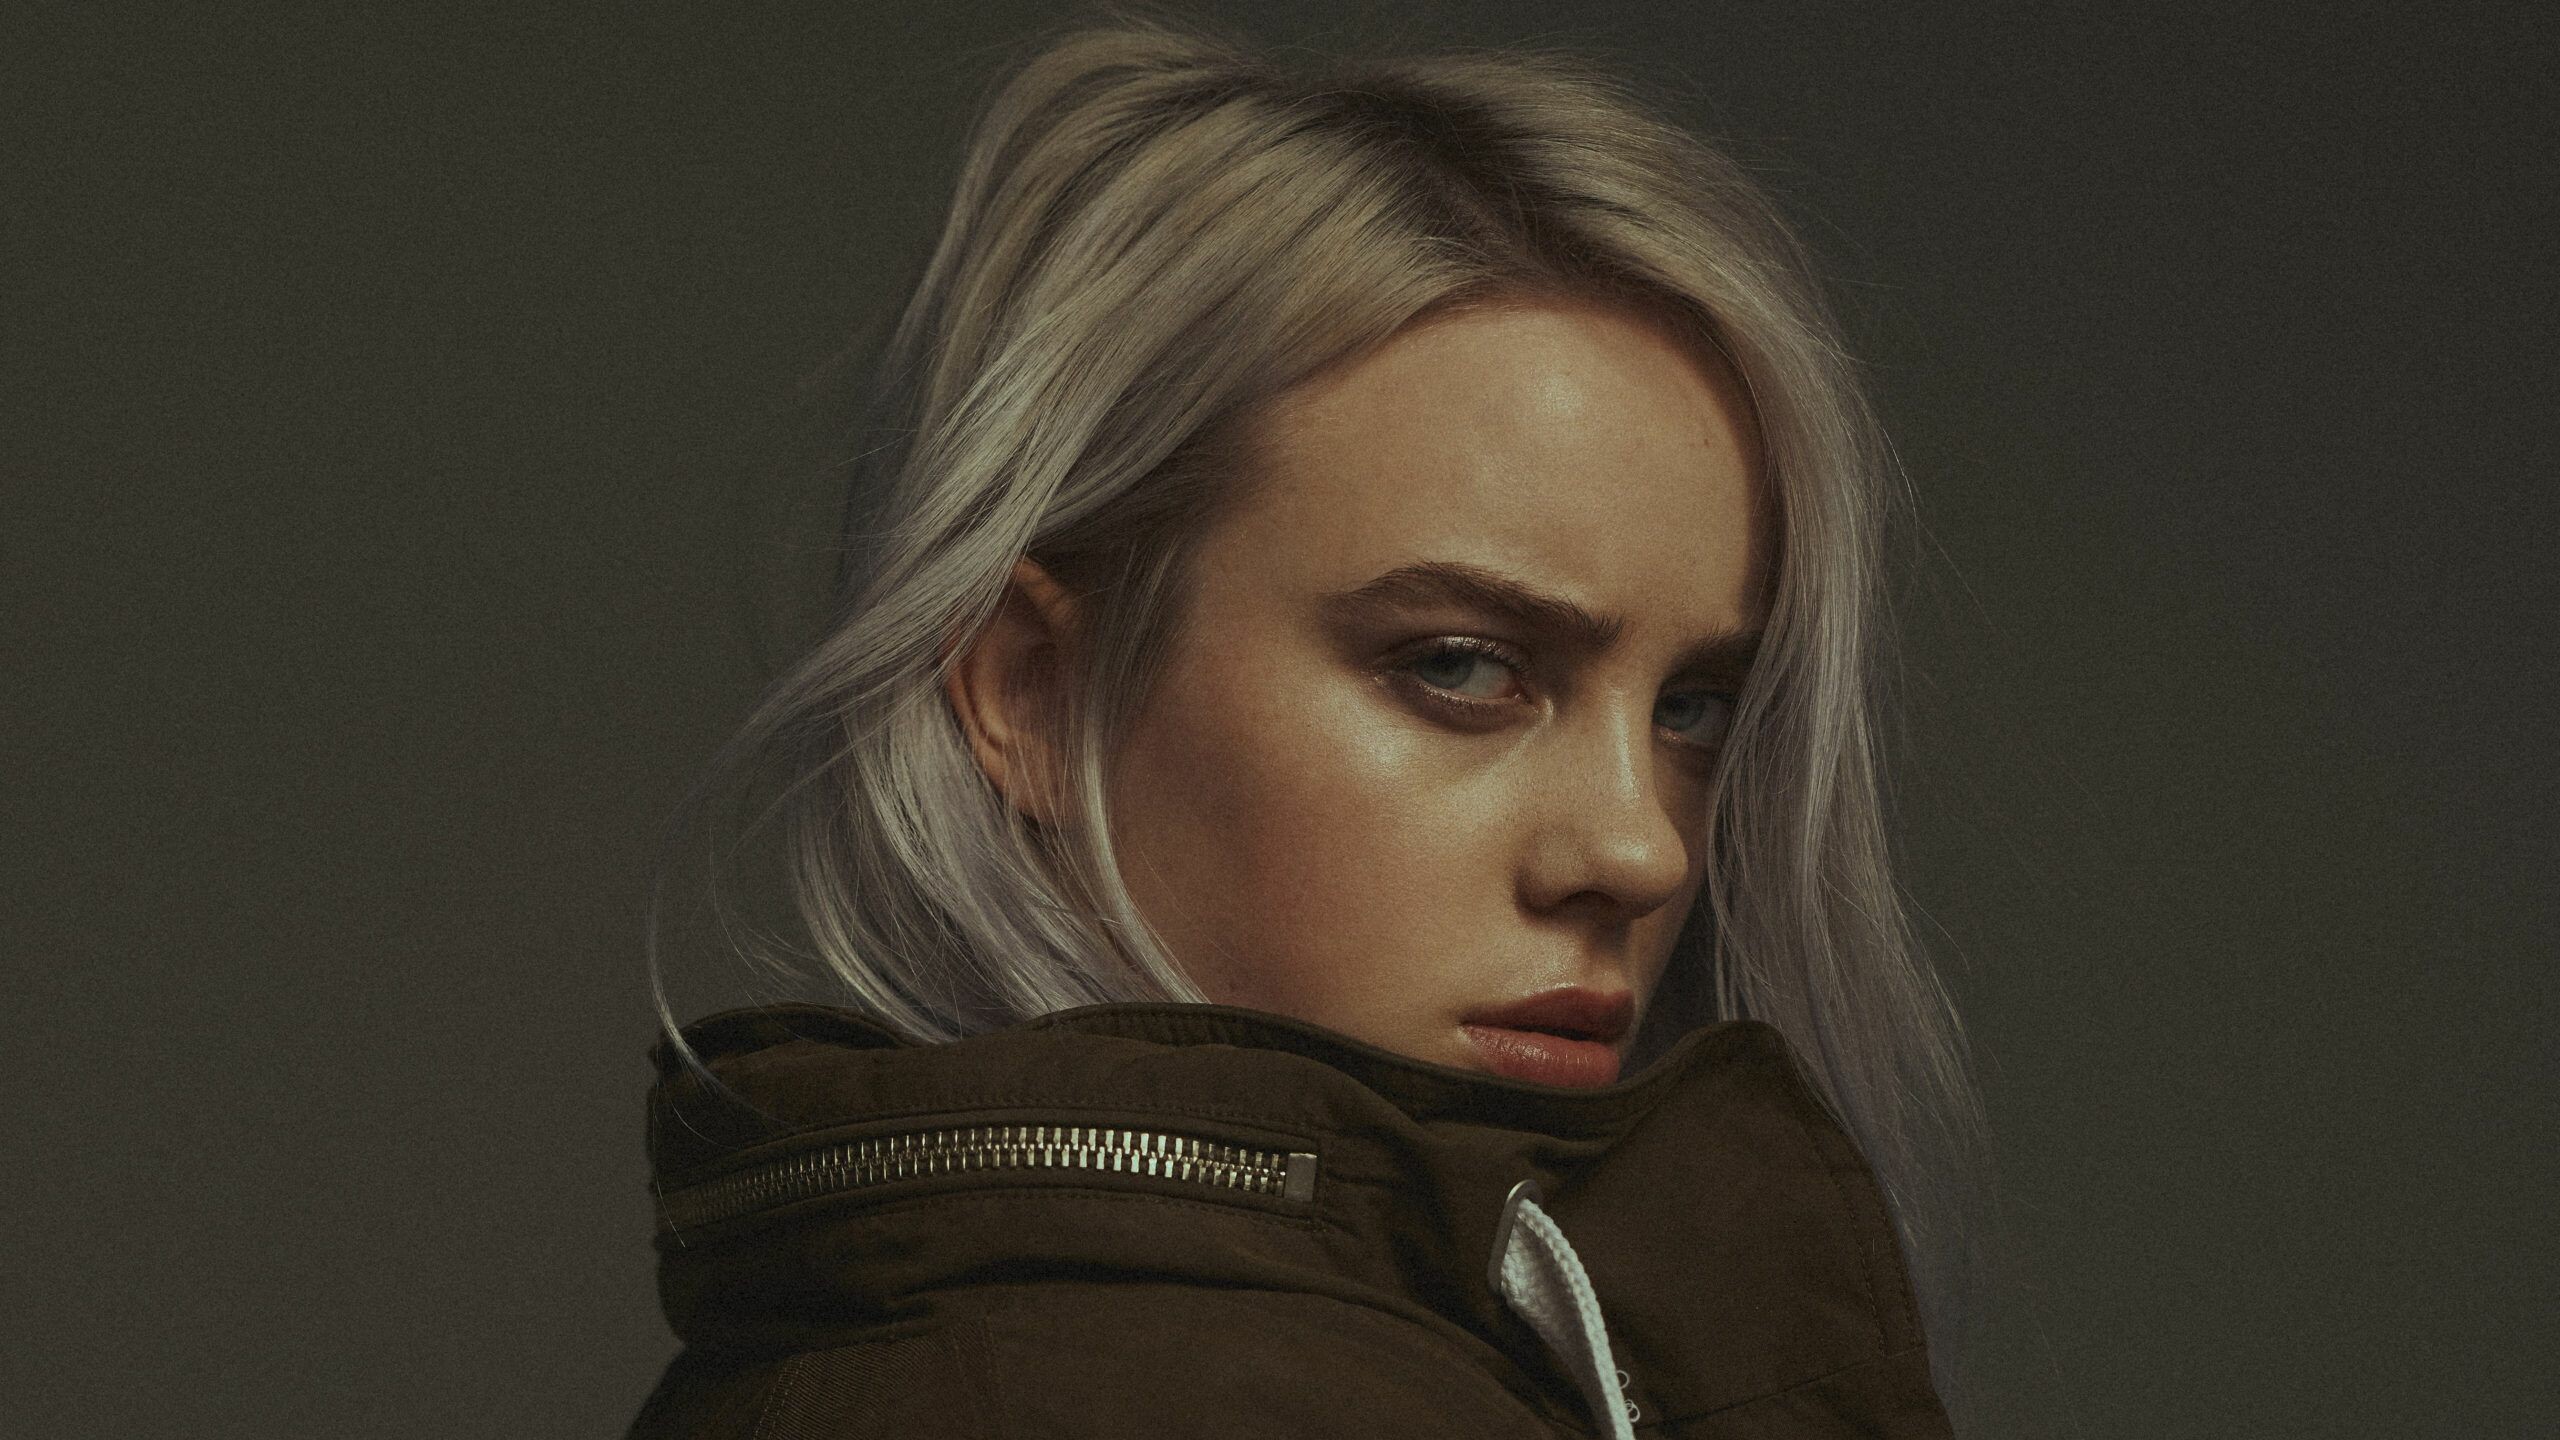 Billie Eilish: One of the most successful artists of the 2010s, Everything I wanted. 2560x1440 HD Wallpaper.